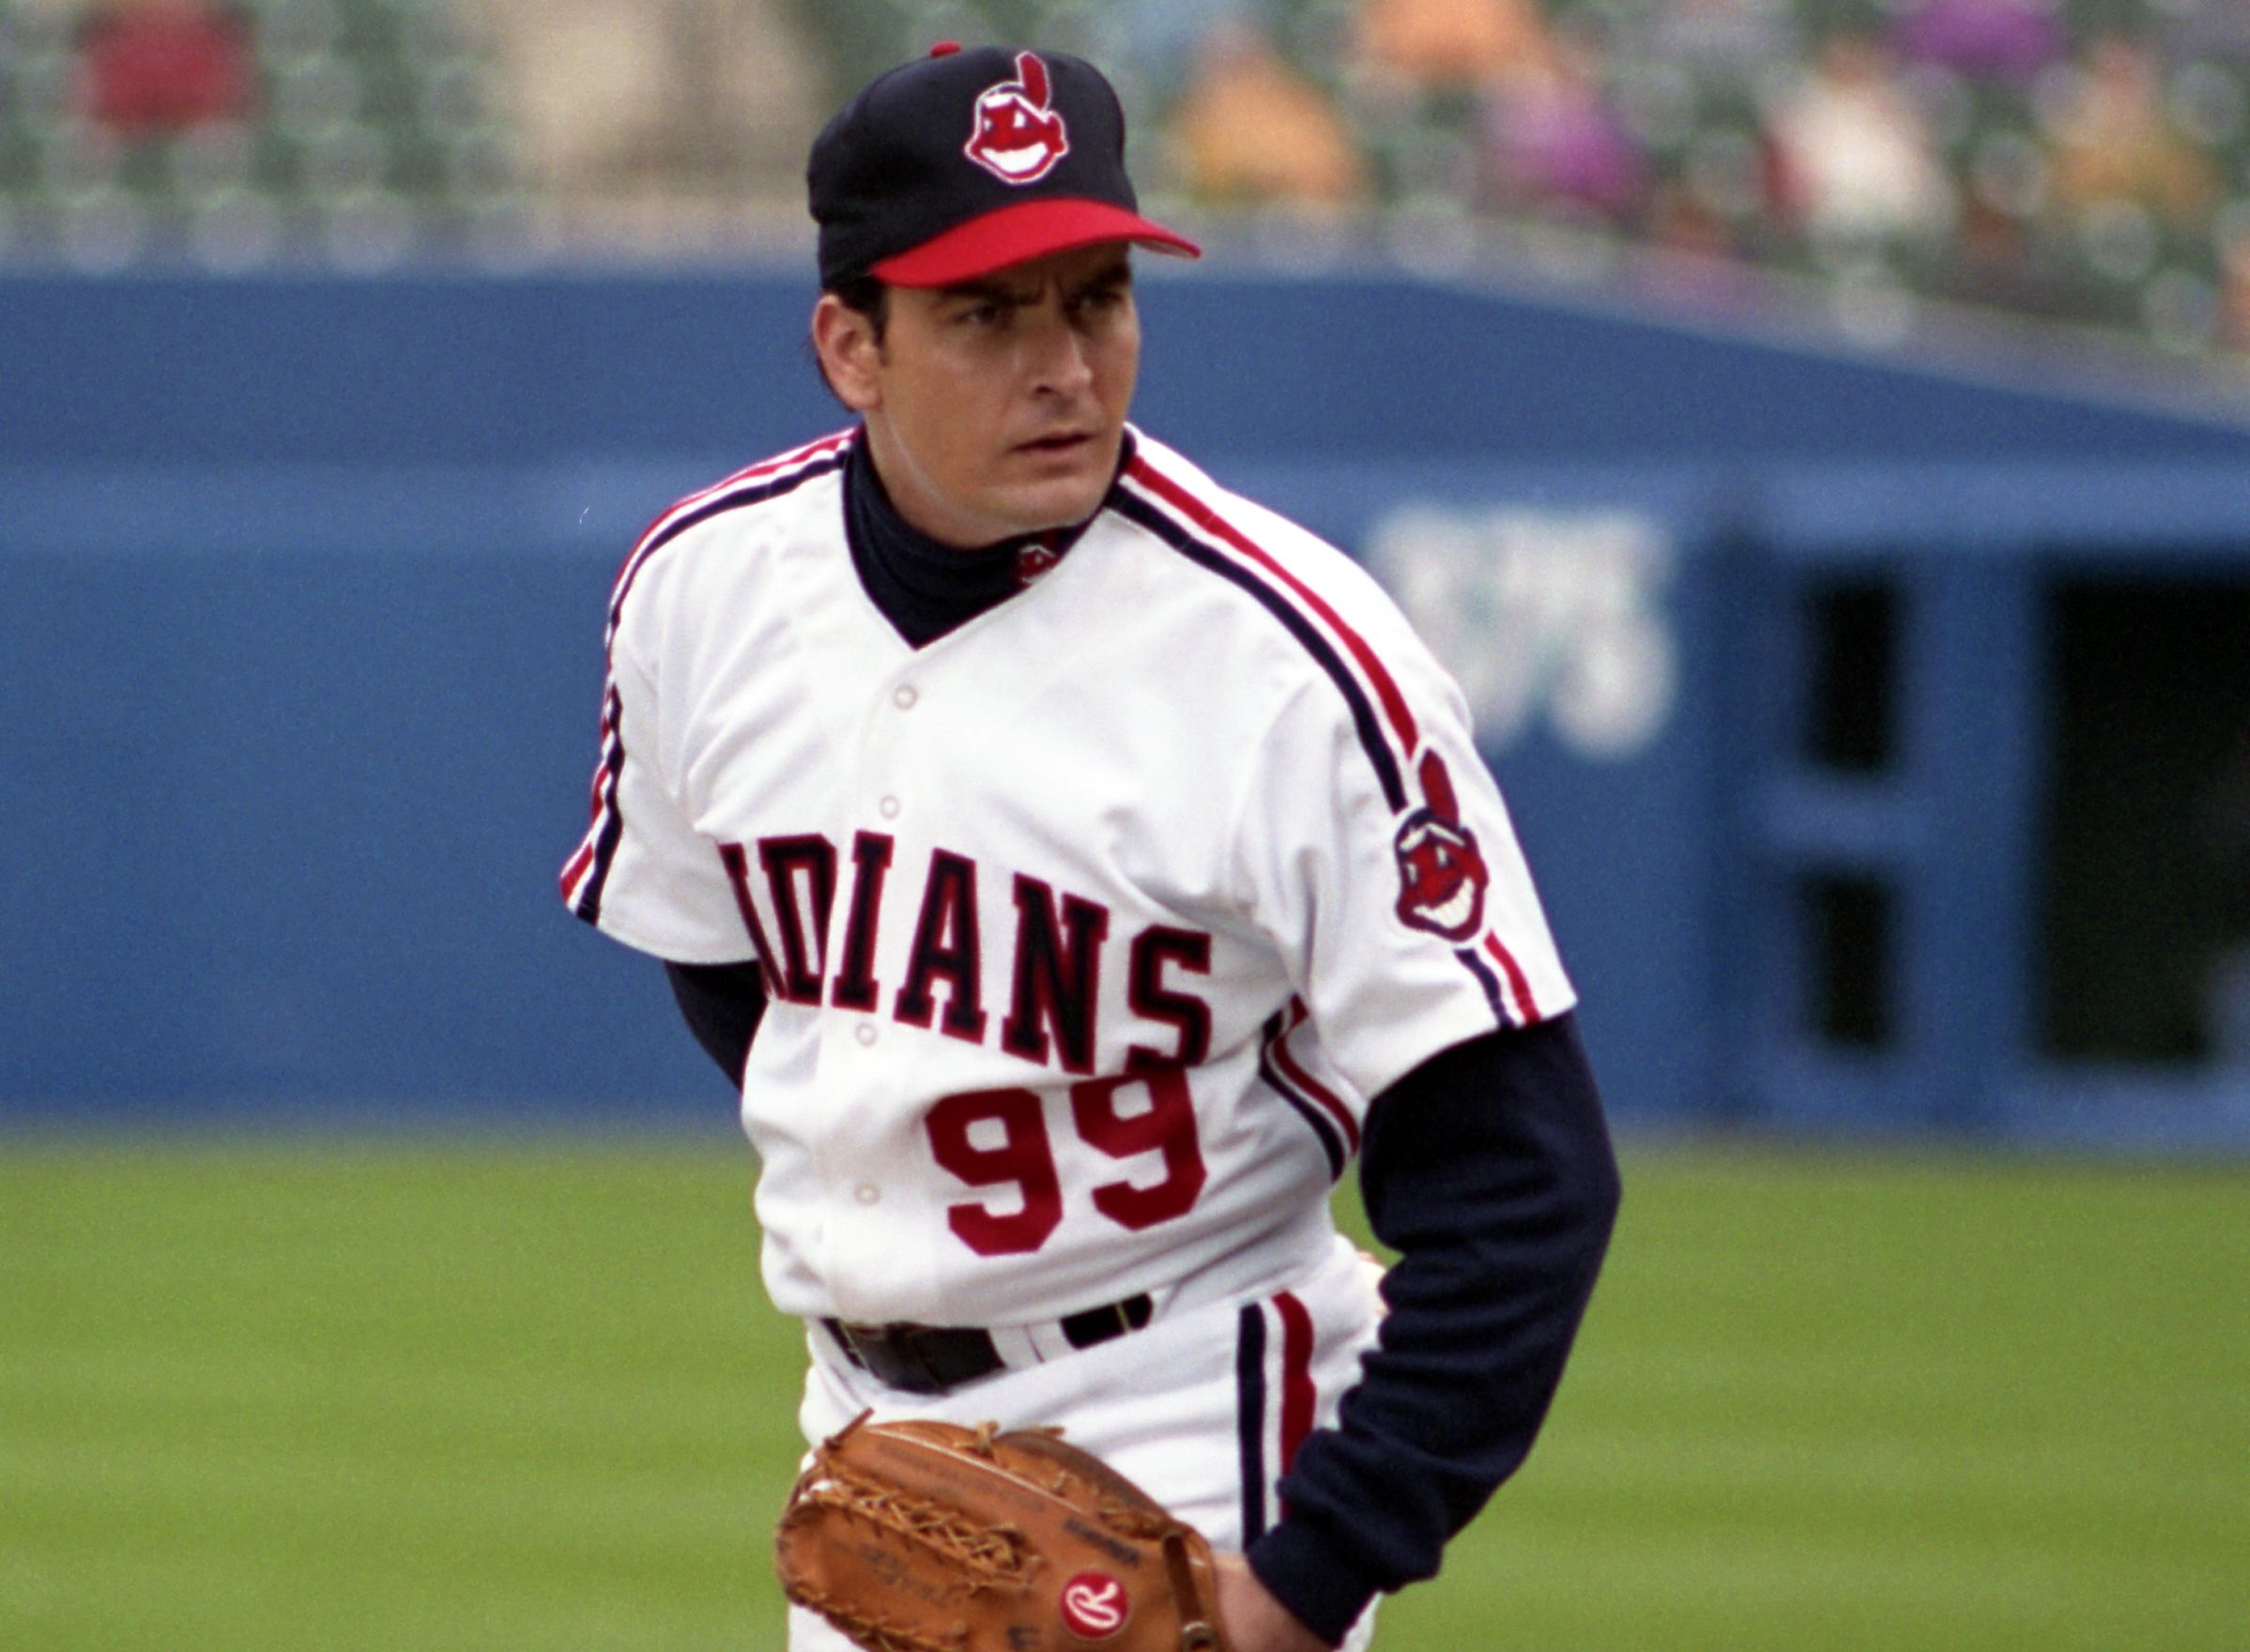 Charlie Sheen in a Cleveland Indians uniform.